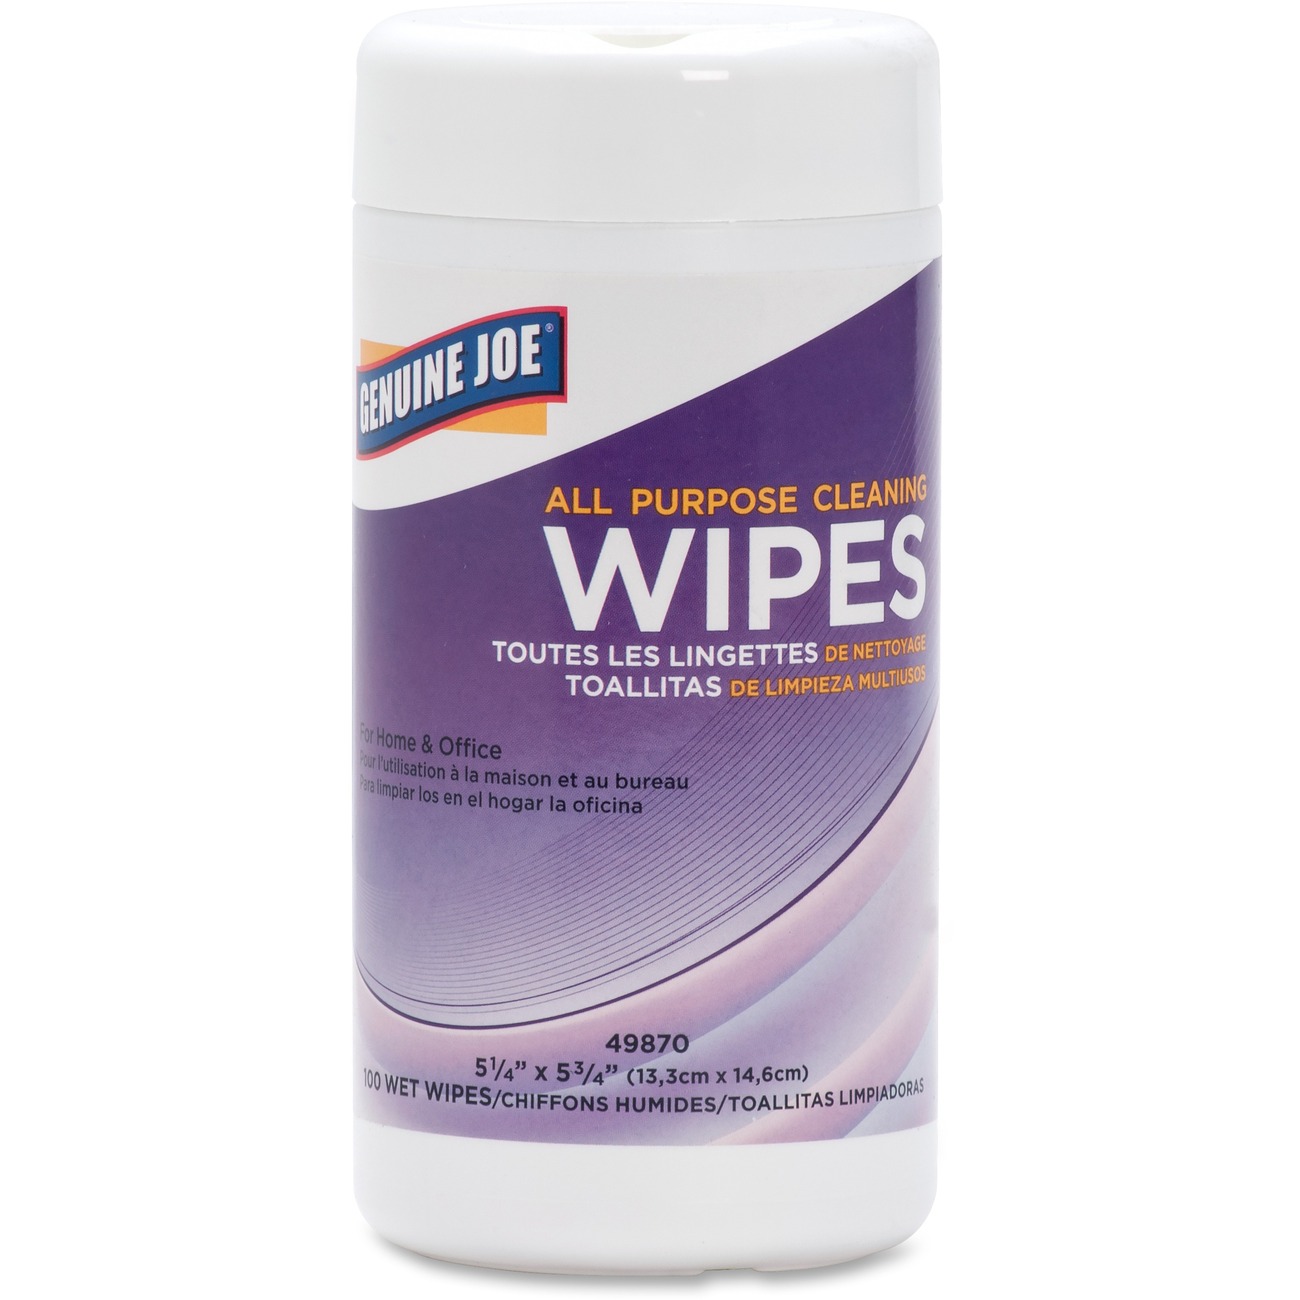 Cleaning wipes. Special Cleaning wipes. Faberlic all-purpose Cleaner wet wipes купить. Wipe wipe trend TT.